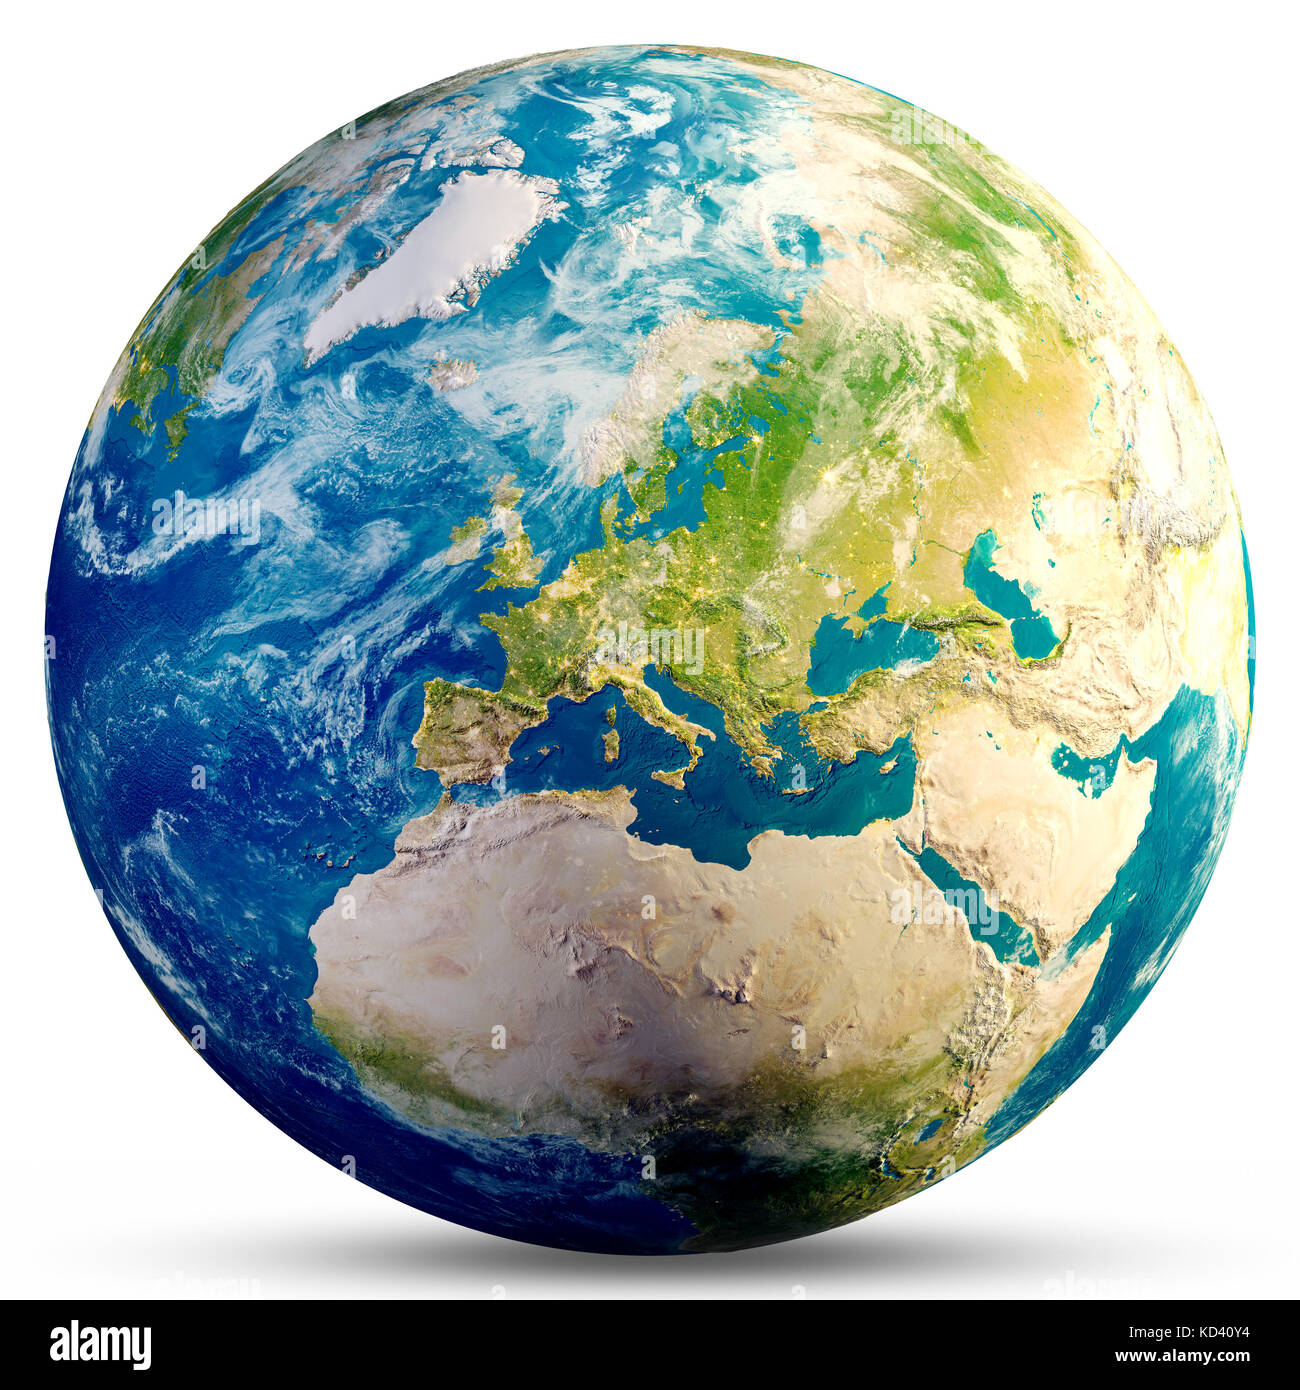 Planet Earth - Europe 3d rendering Stock Photo